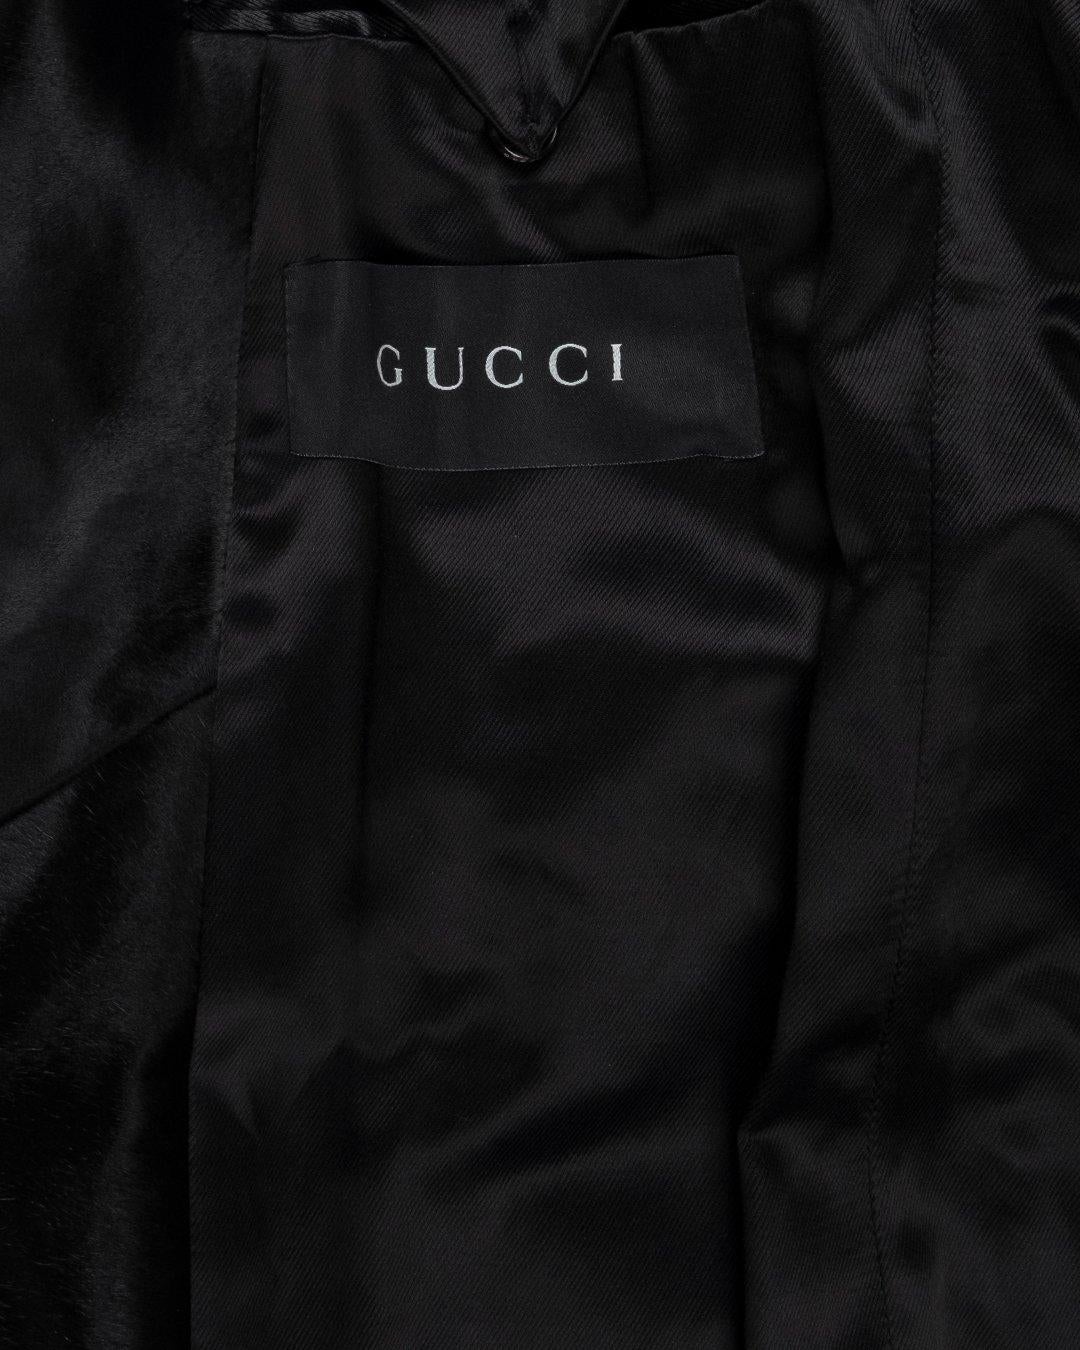 Gucci AW2005 Pony-Hair Evening Jacket In Excellent Condition For Sale In Beverly Hills, CA